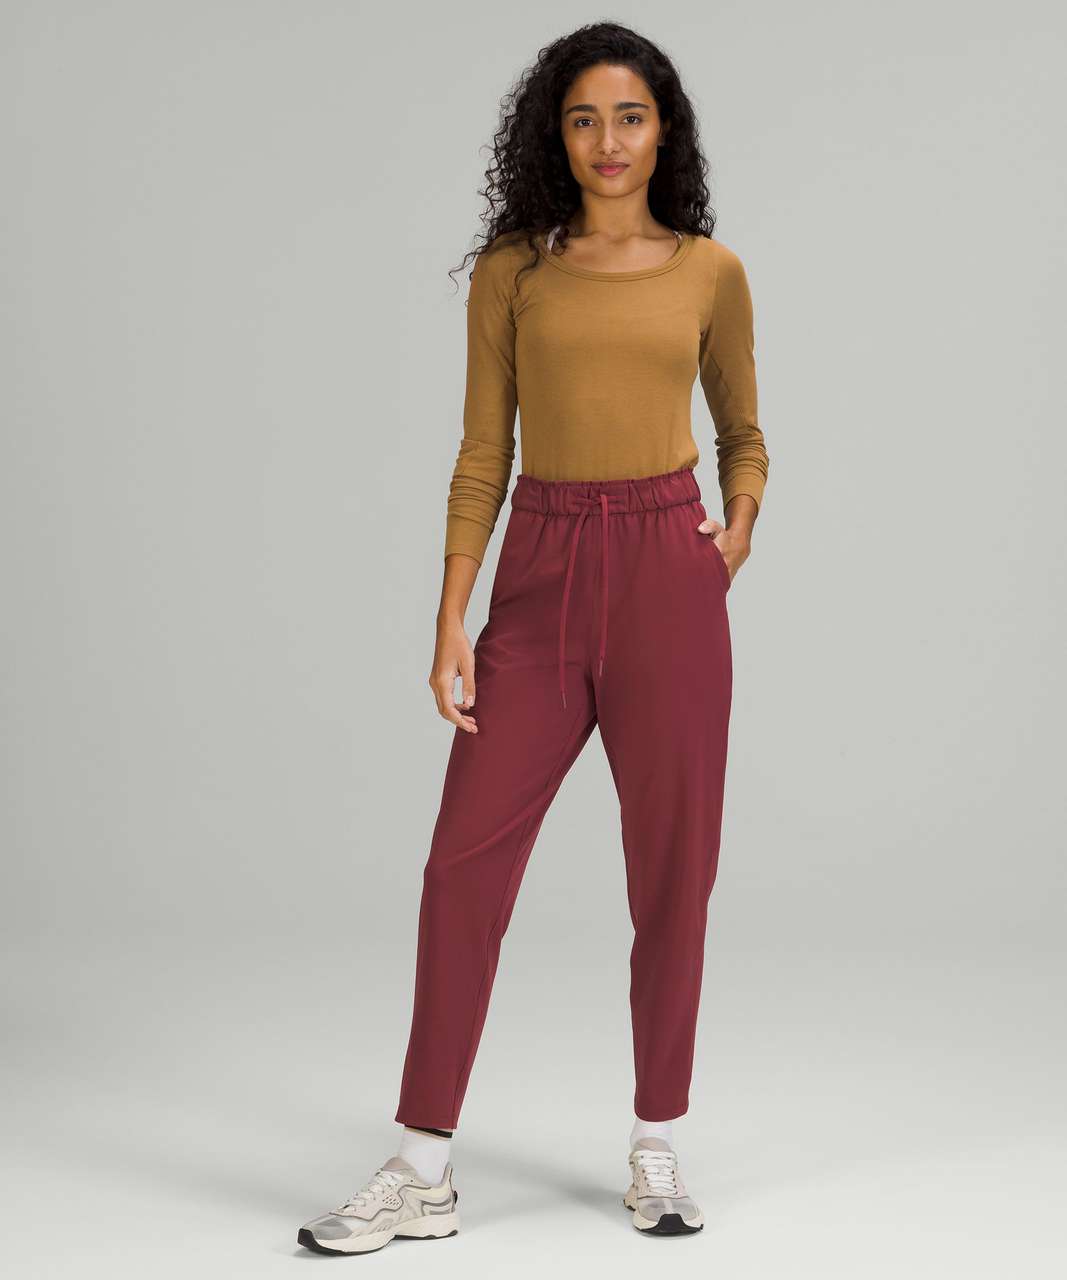 Lululemon Size 8 Align HR Crop 21 Mulled Wine MLWI Pant Buttery Nulu Hi Rise